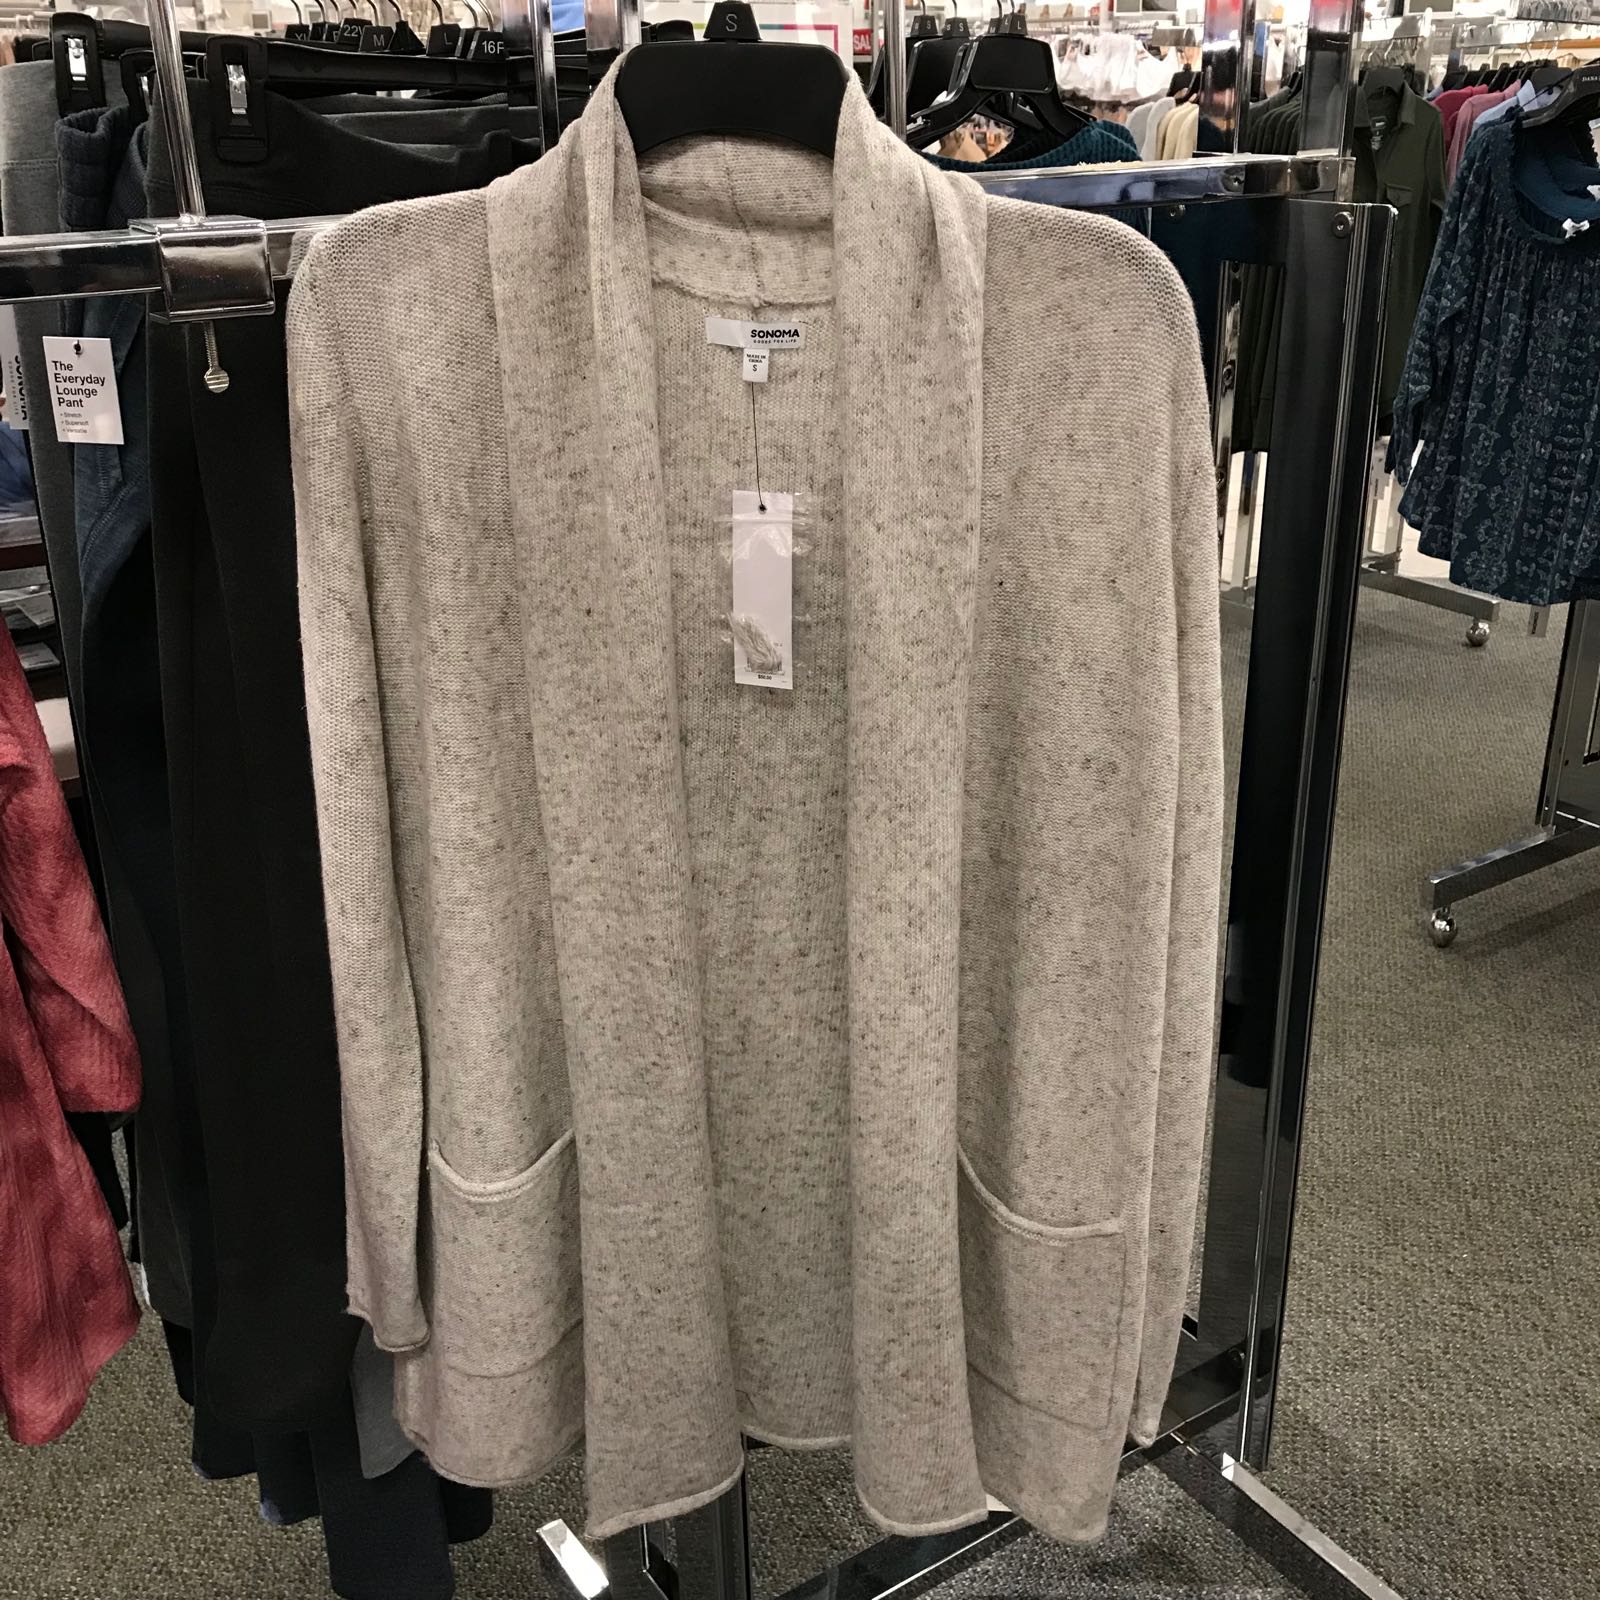 Kohl's has the comfiest sweaters and joggers under $35!